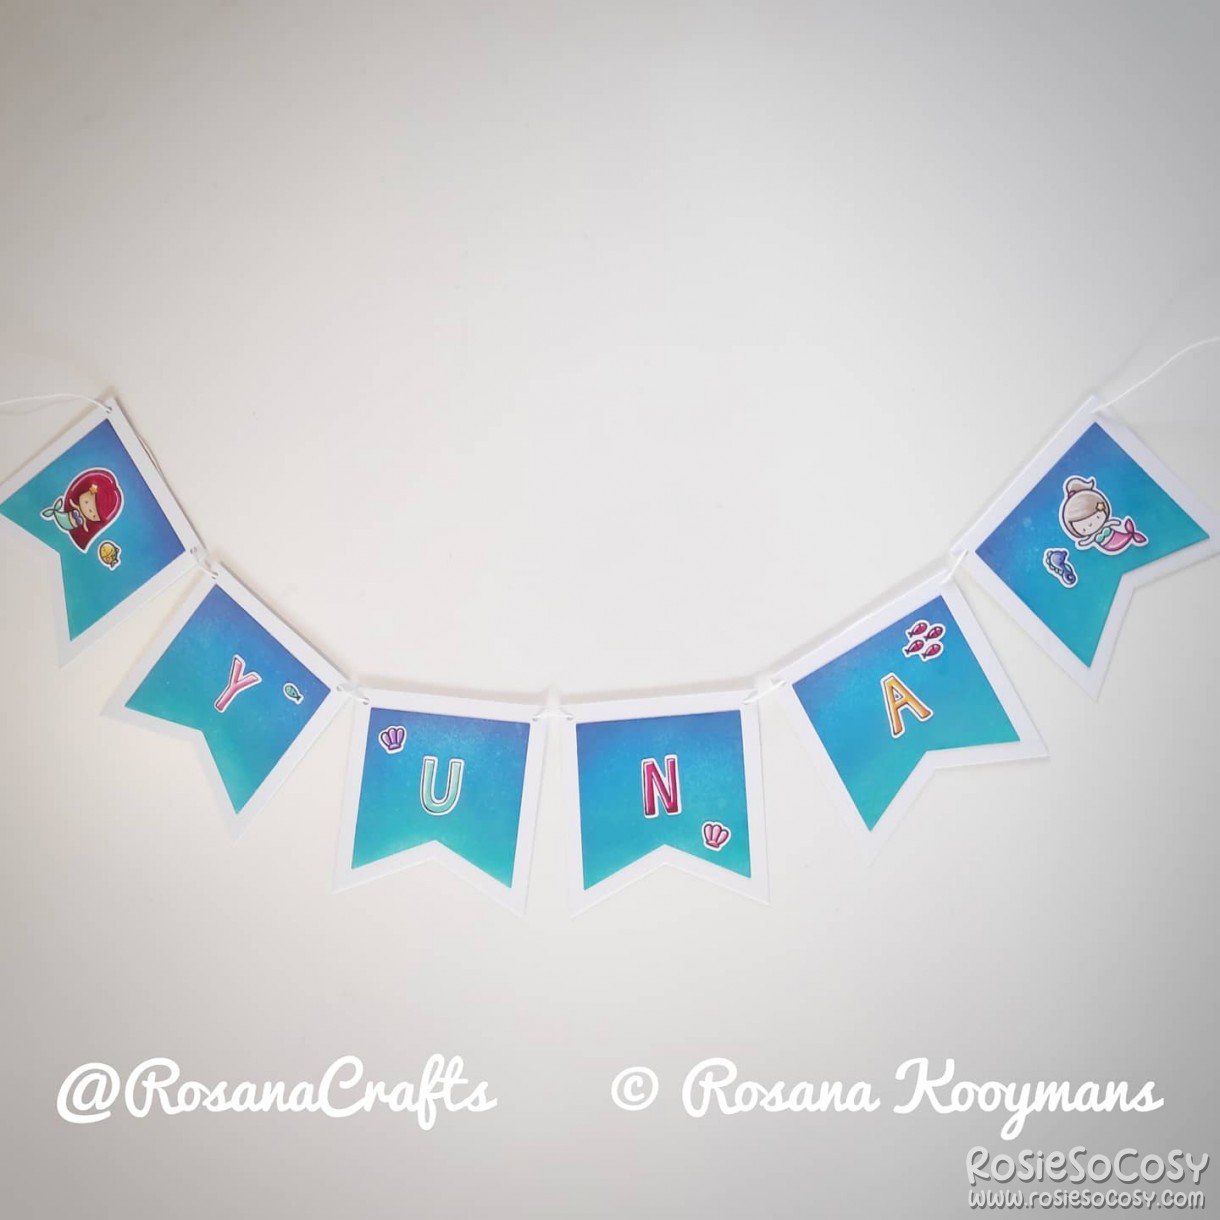 The Little Mermaid Garland for Yuna